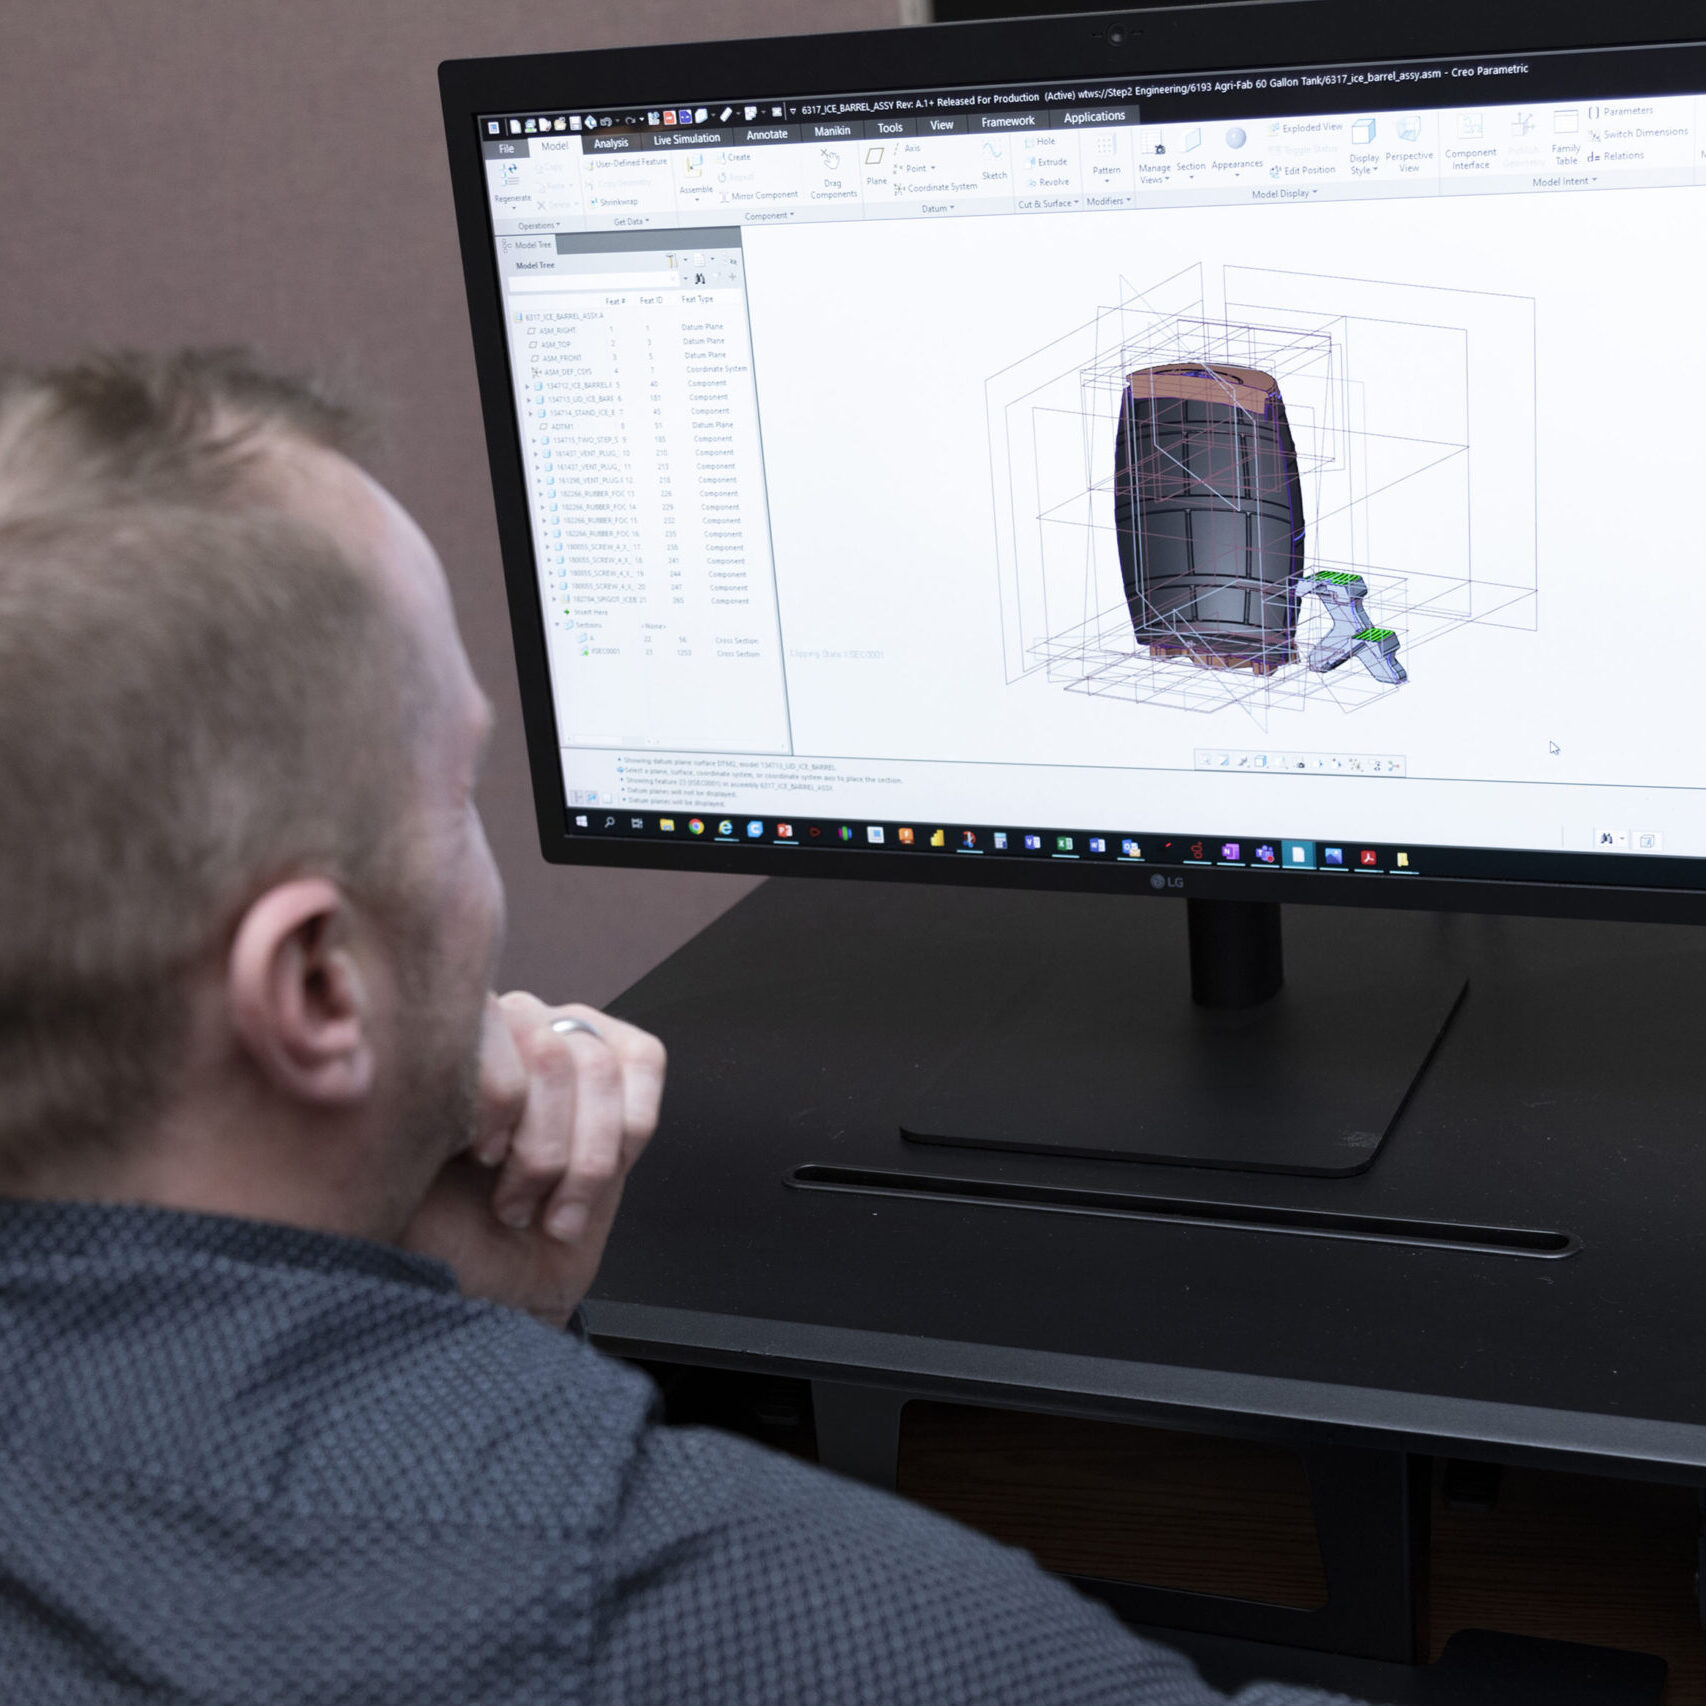 Man looks at a computer screen of the interior of an Ice Barrel product design.